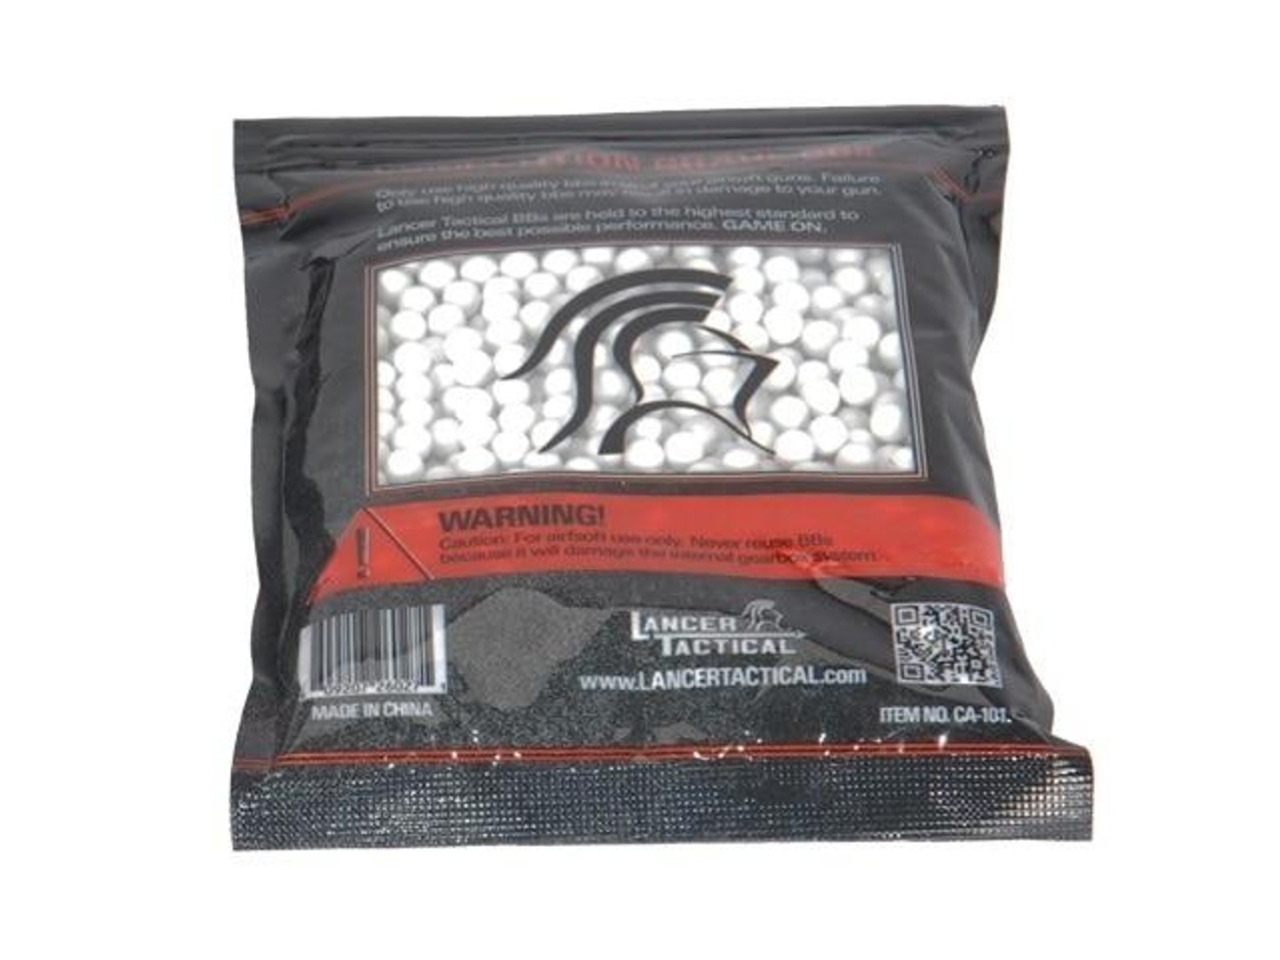 Lancer Tactical Seamless 0.20g Airsoft BB 1000 Rds, 6mm, 1000 count